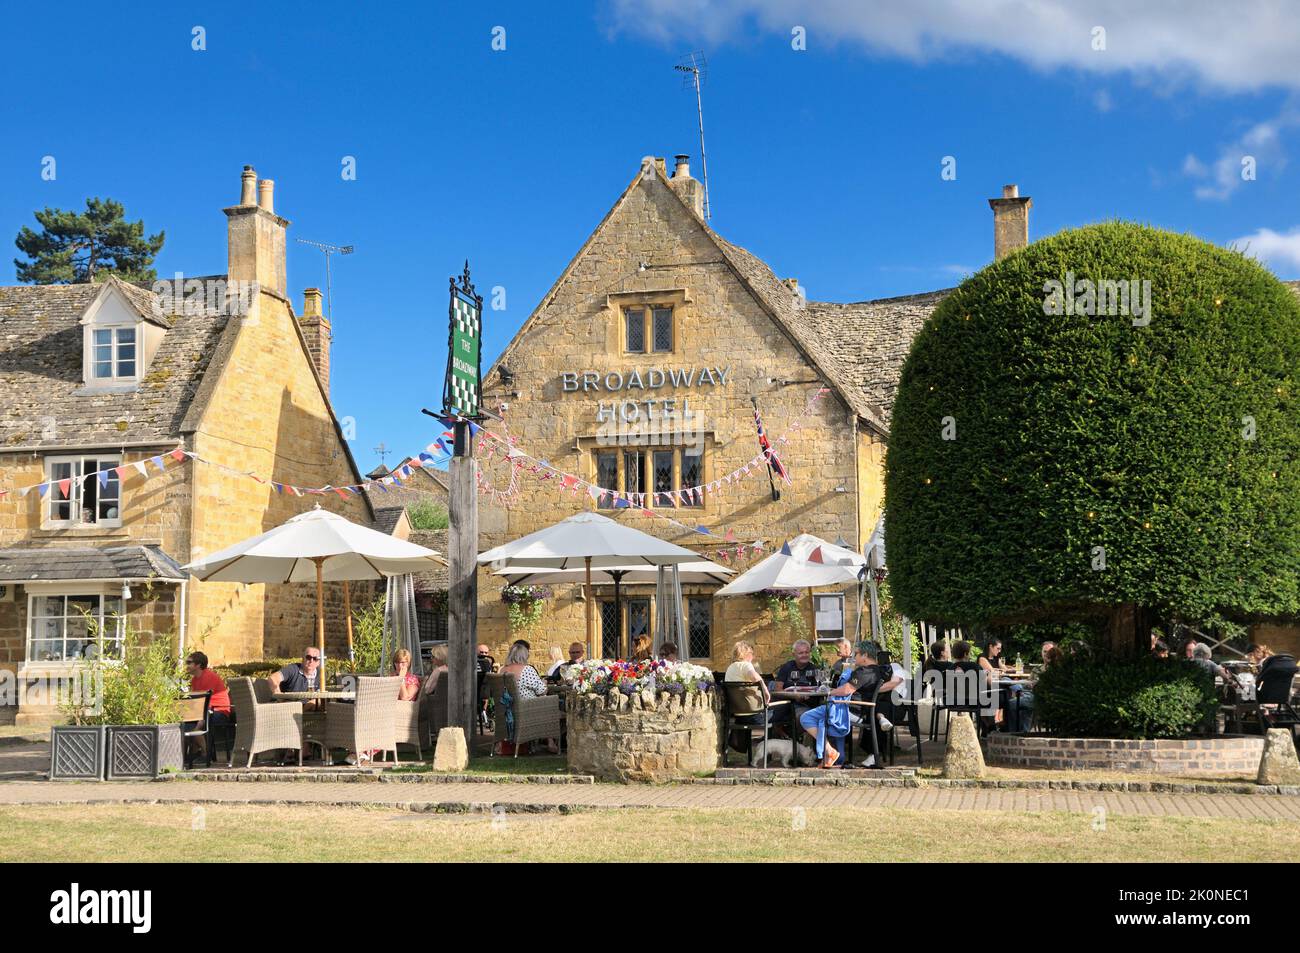 The Broadway Hotel, High Street, Broadway, Cotswolds, Worcestershire, Angleterre, Royaume-Uni Banque D'Images